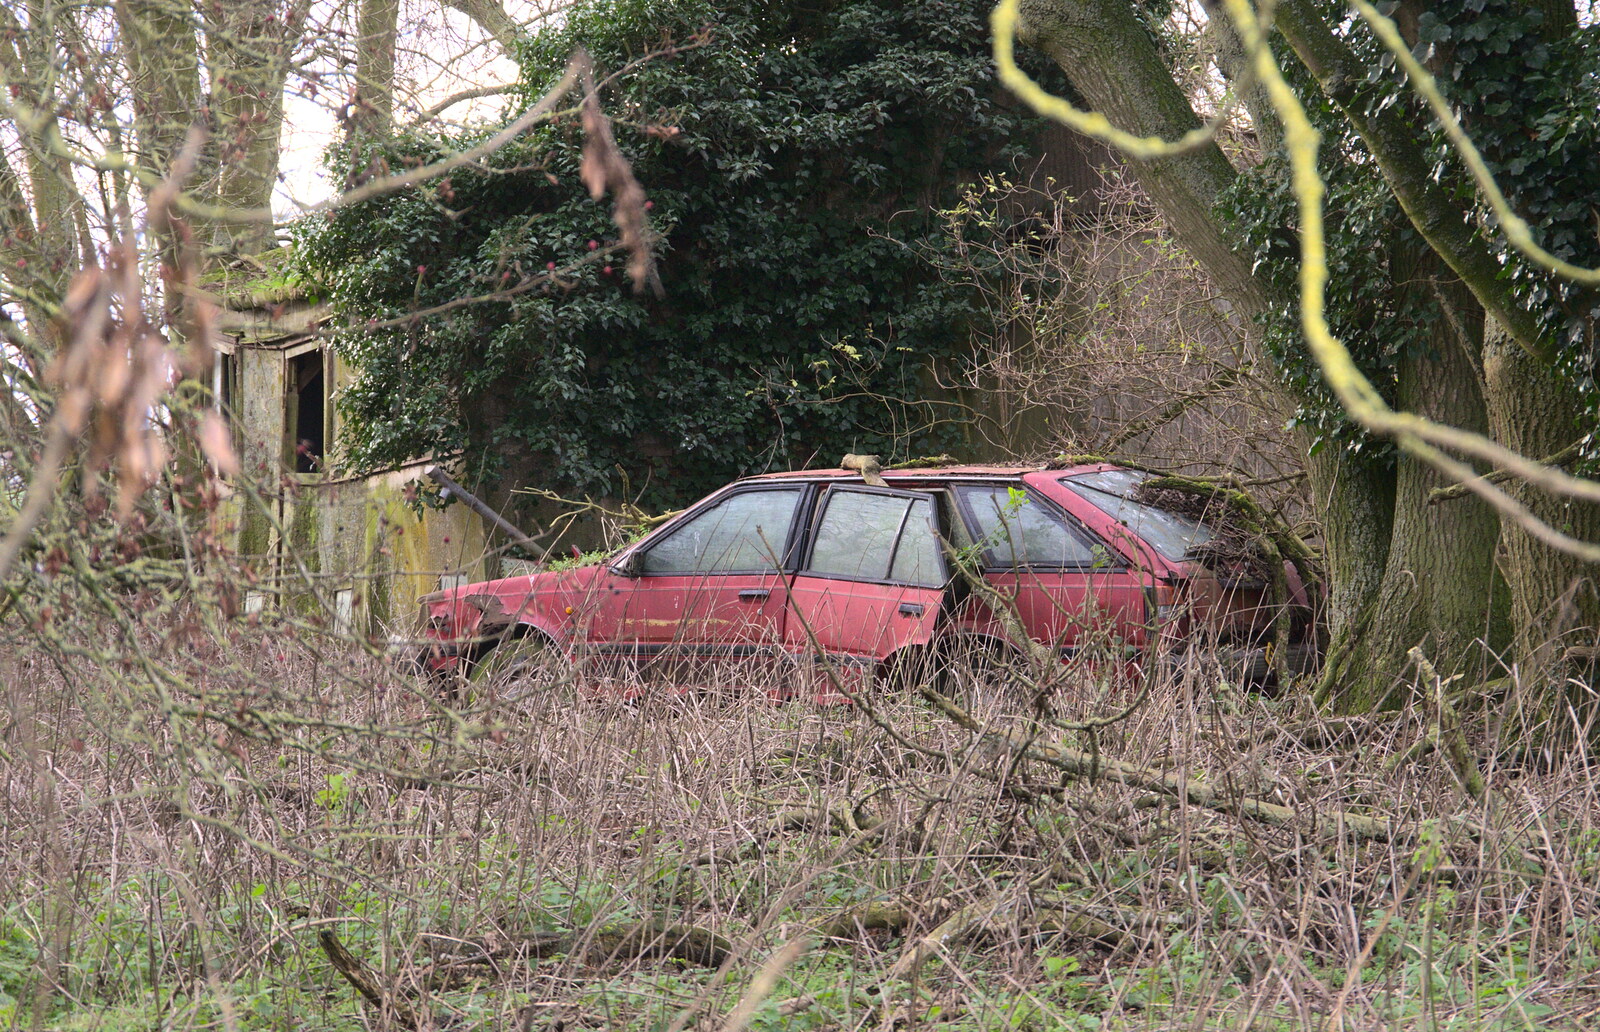 A derelict car in the woods from New Year's Eve and Day, Brome, Suffolk - 1st January 2019